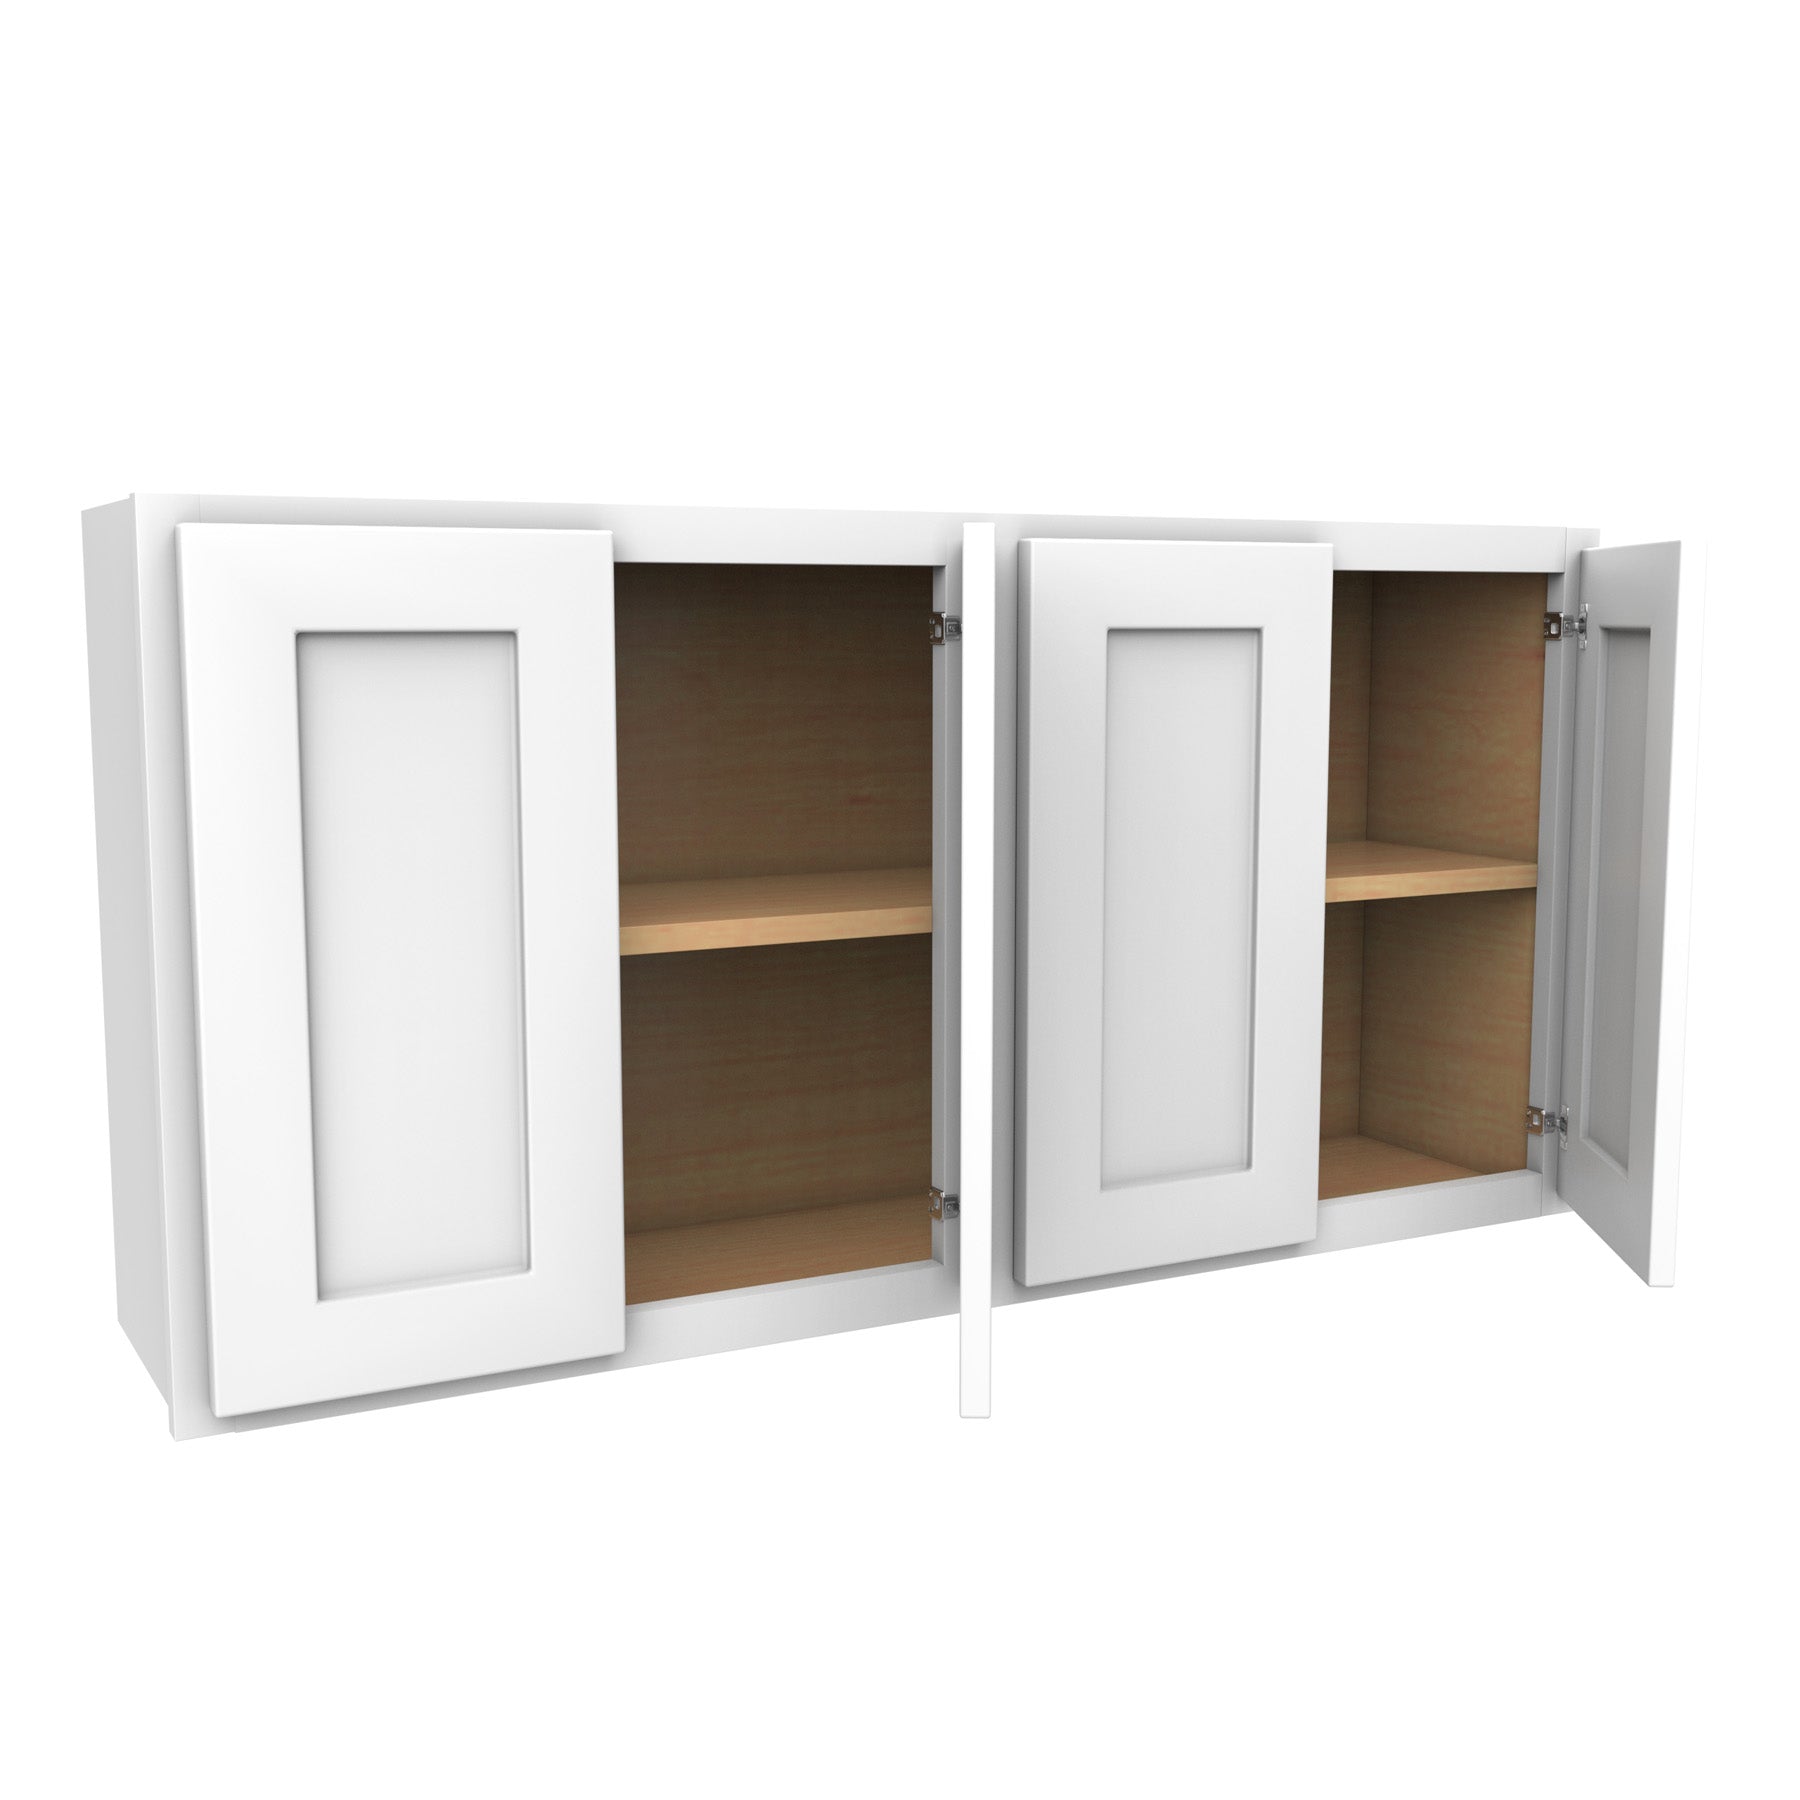 24 Inch High 4 Door Wall Cabinet - Luxor White Shaker- Ready To Assemble, 42"W x 24"H x 12"D